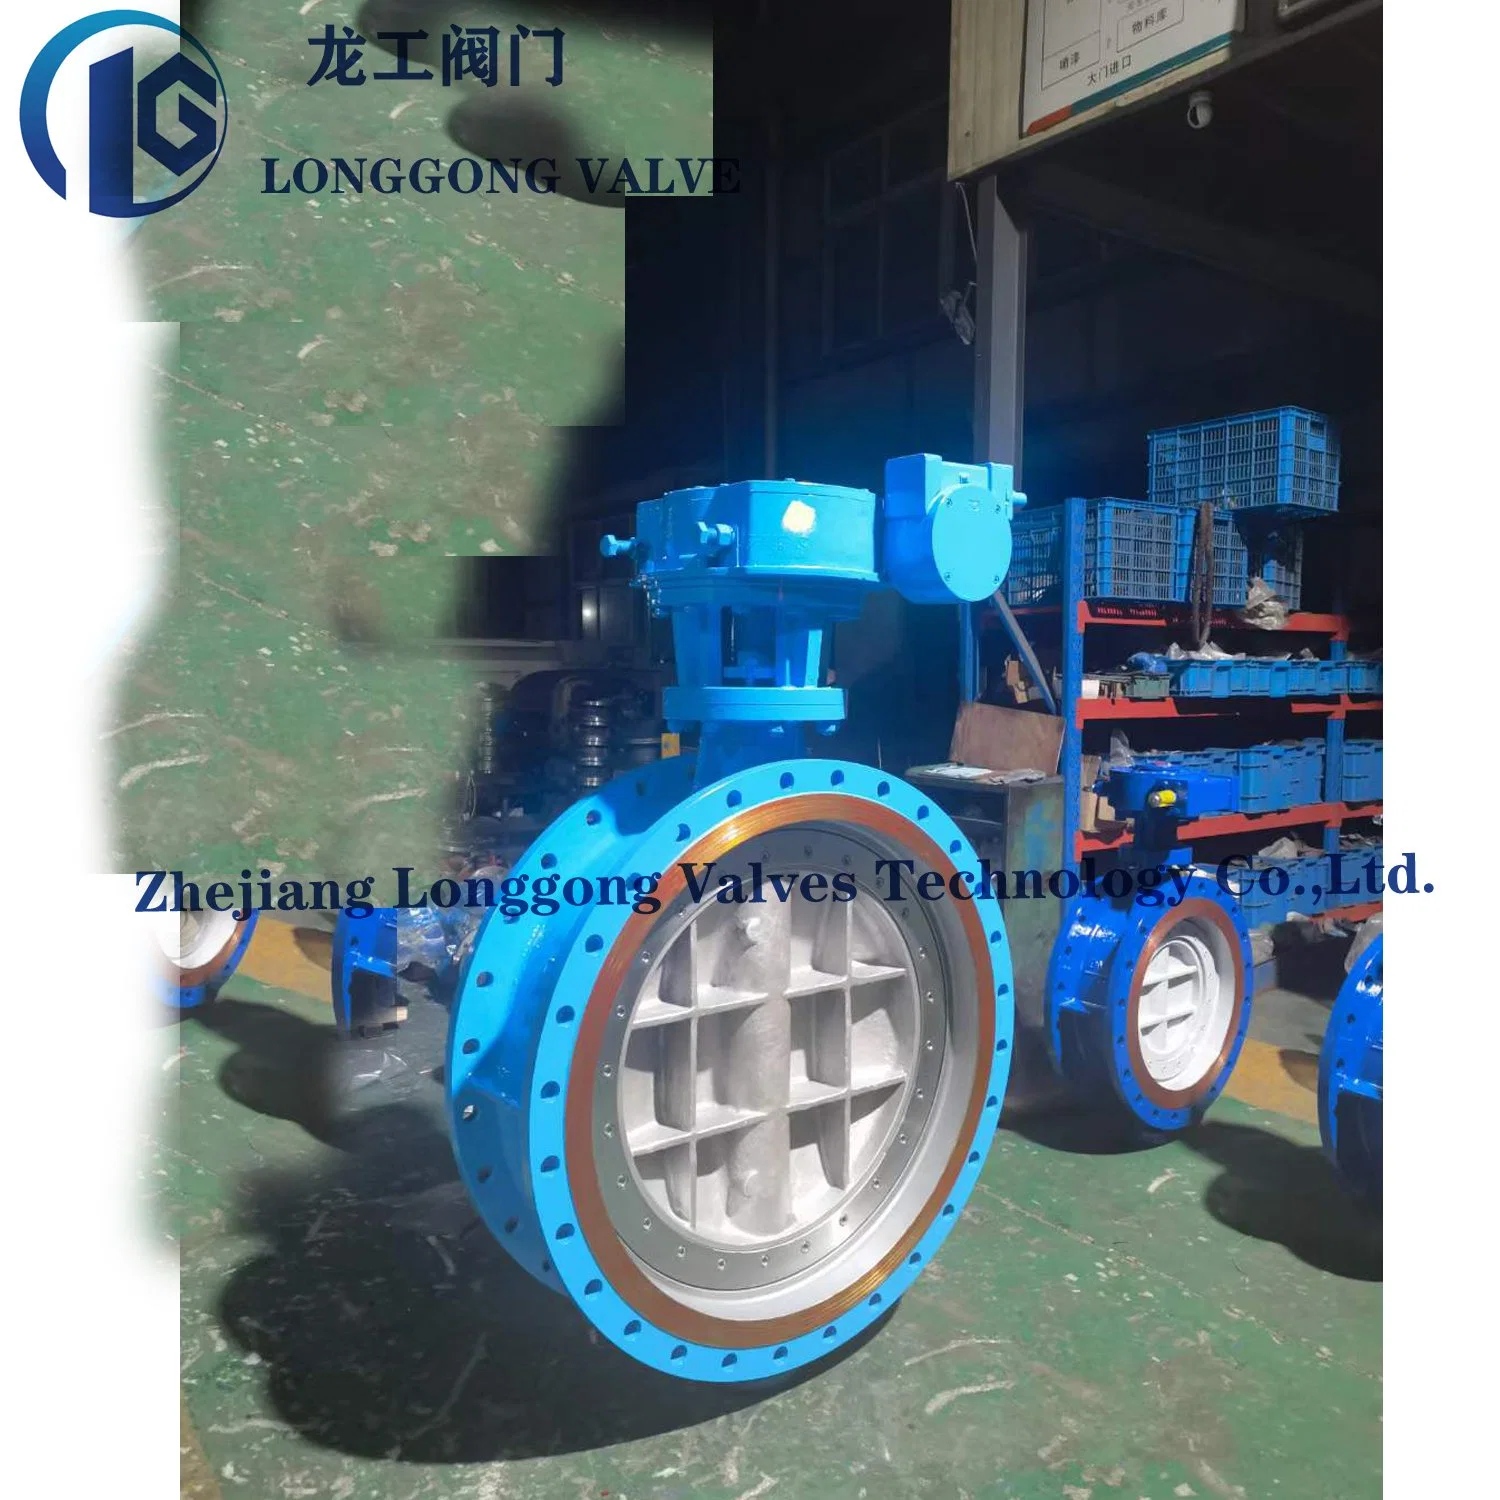 Pneumatic/Electric/Gear/Handwheel Operated Flange Wafer Type Cast Steel Stainless Steel Cast Iron Butterfly Valves EPDM NBR Metal Seat Pn16 Class 150